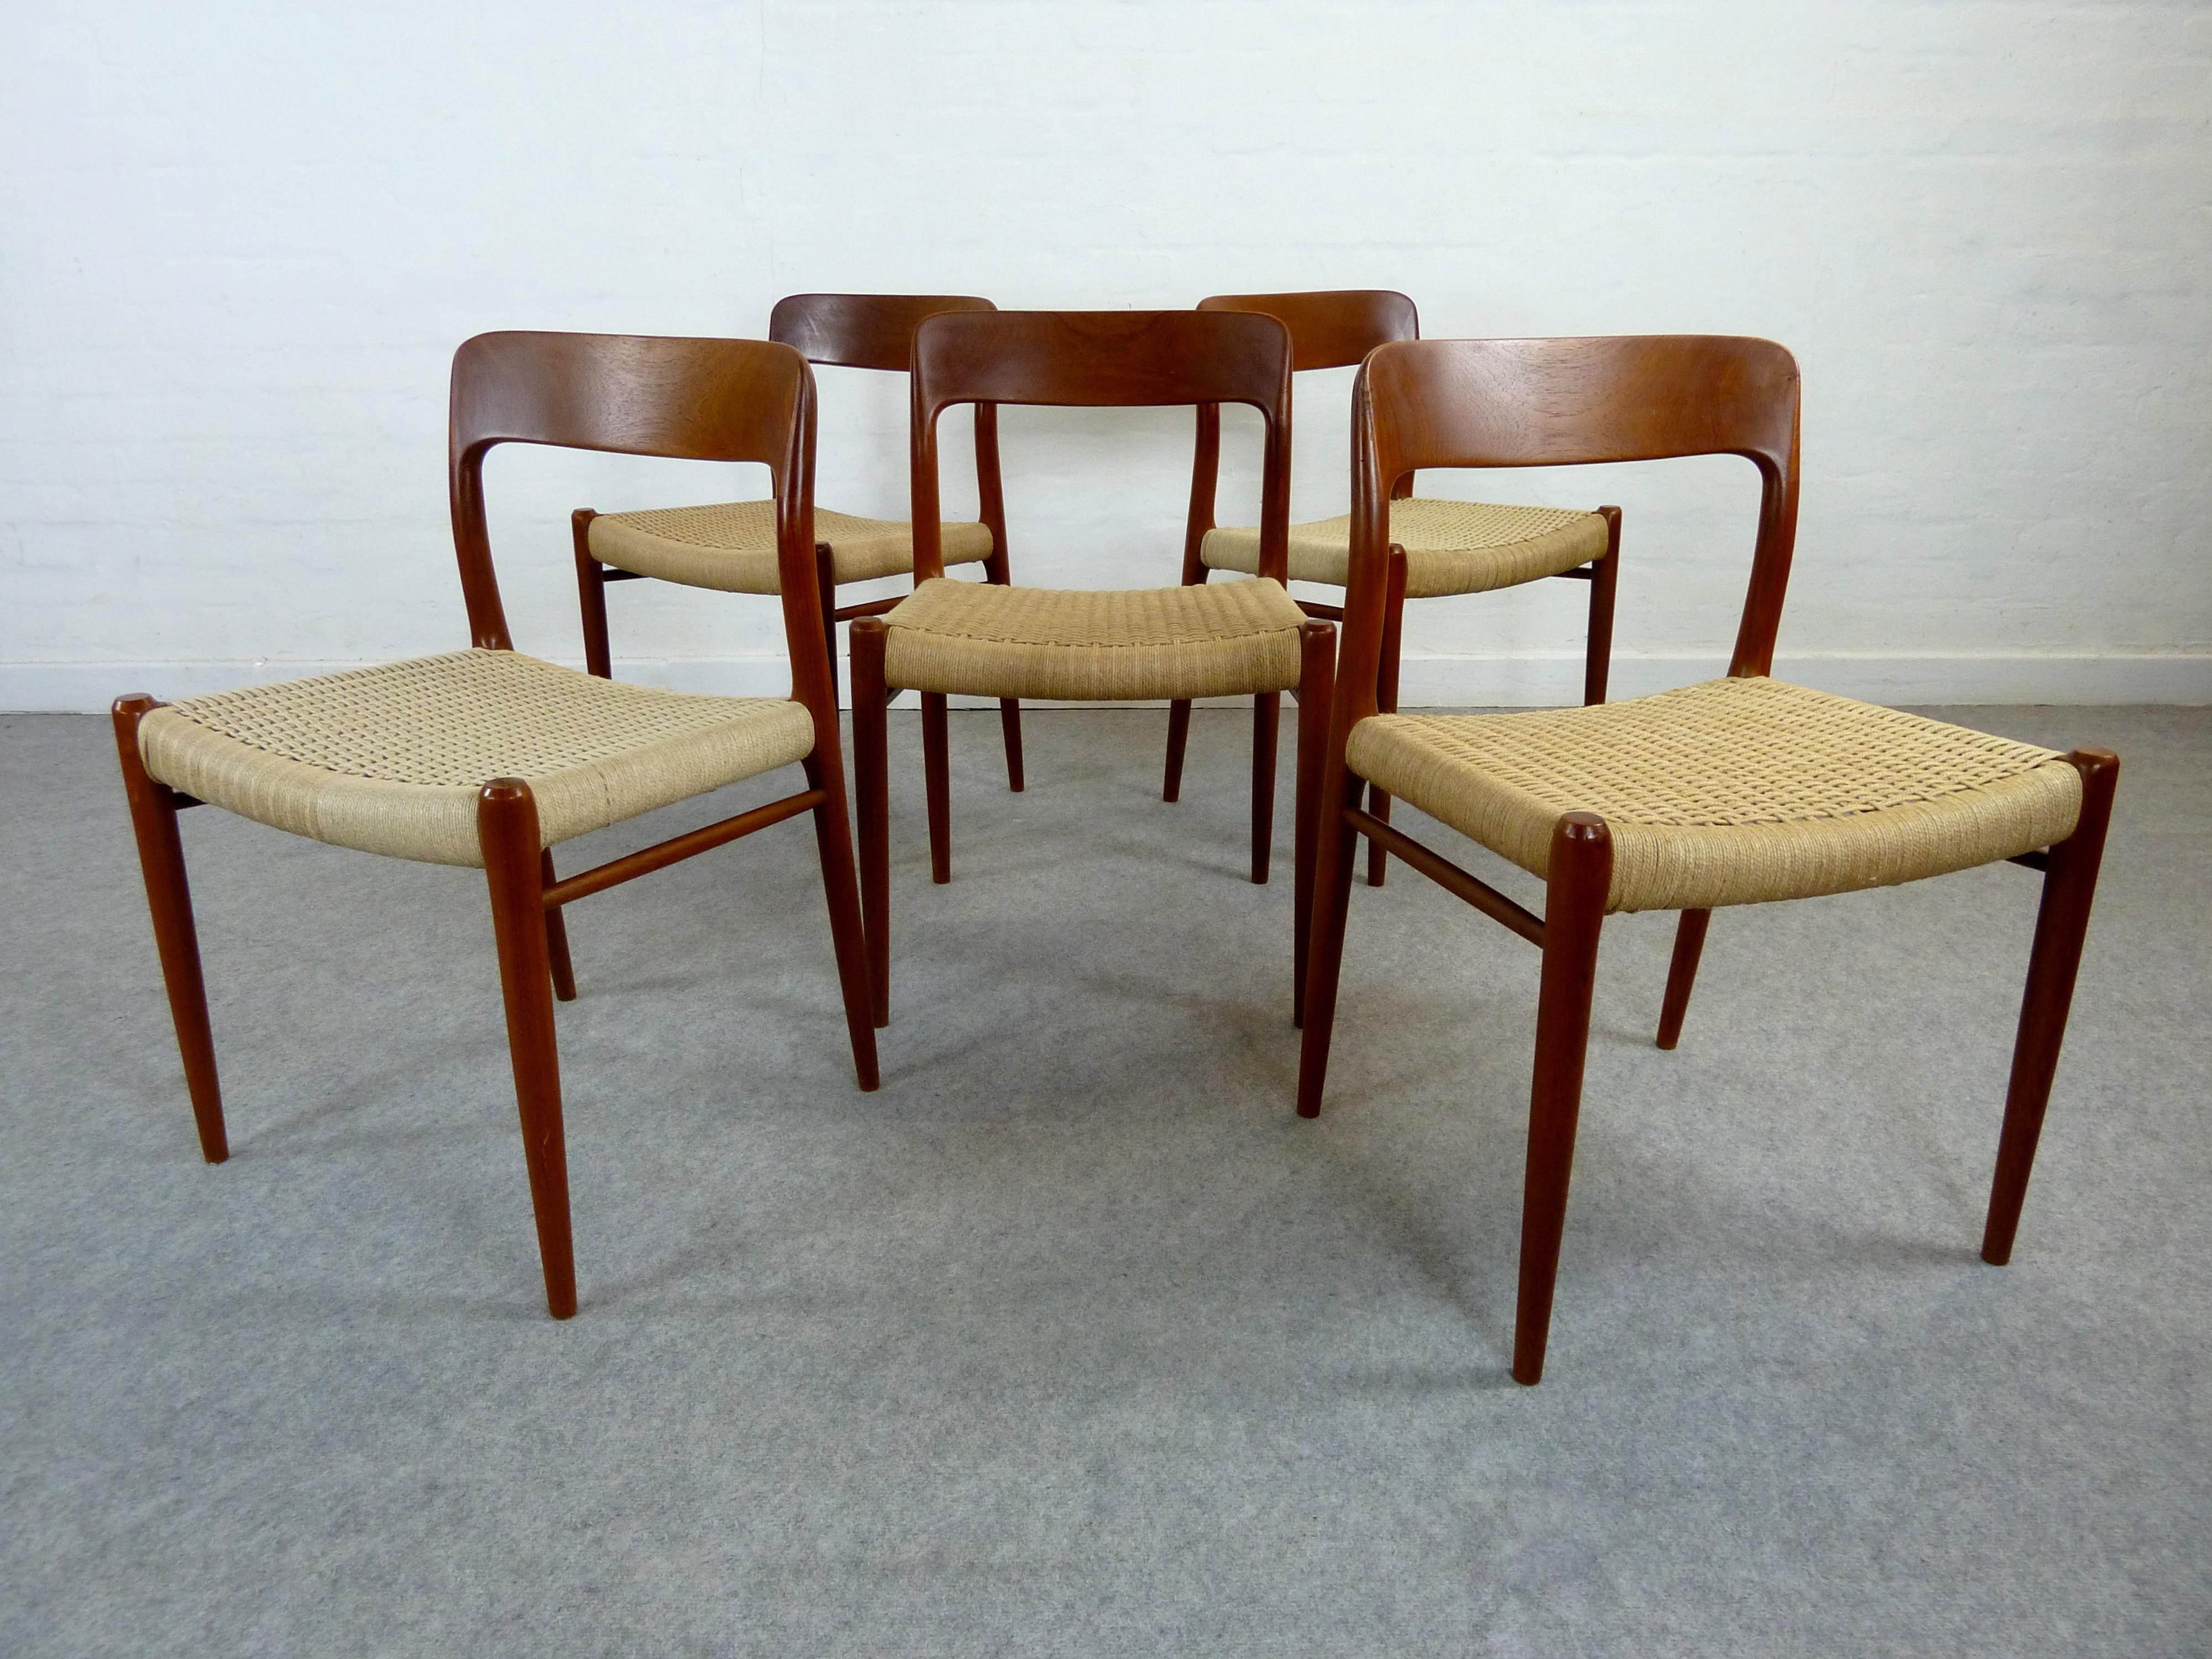 A Set of 5 teak chairs, Model 75 designed from Niels O. Moeller.
Made in Denmark in the 1960s.
  